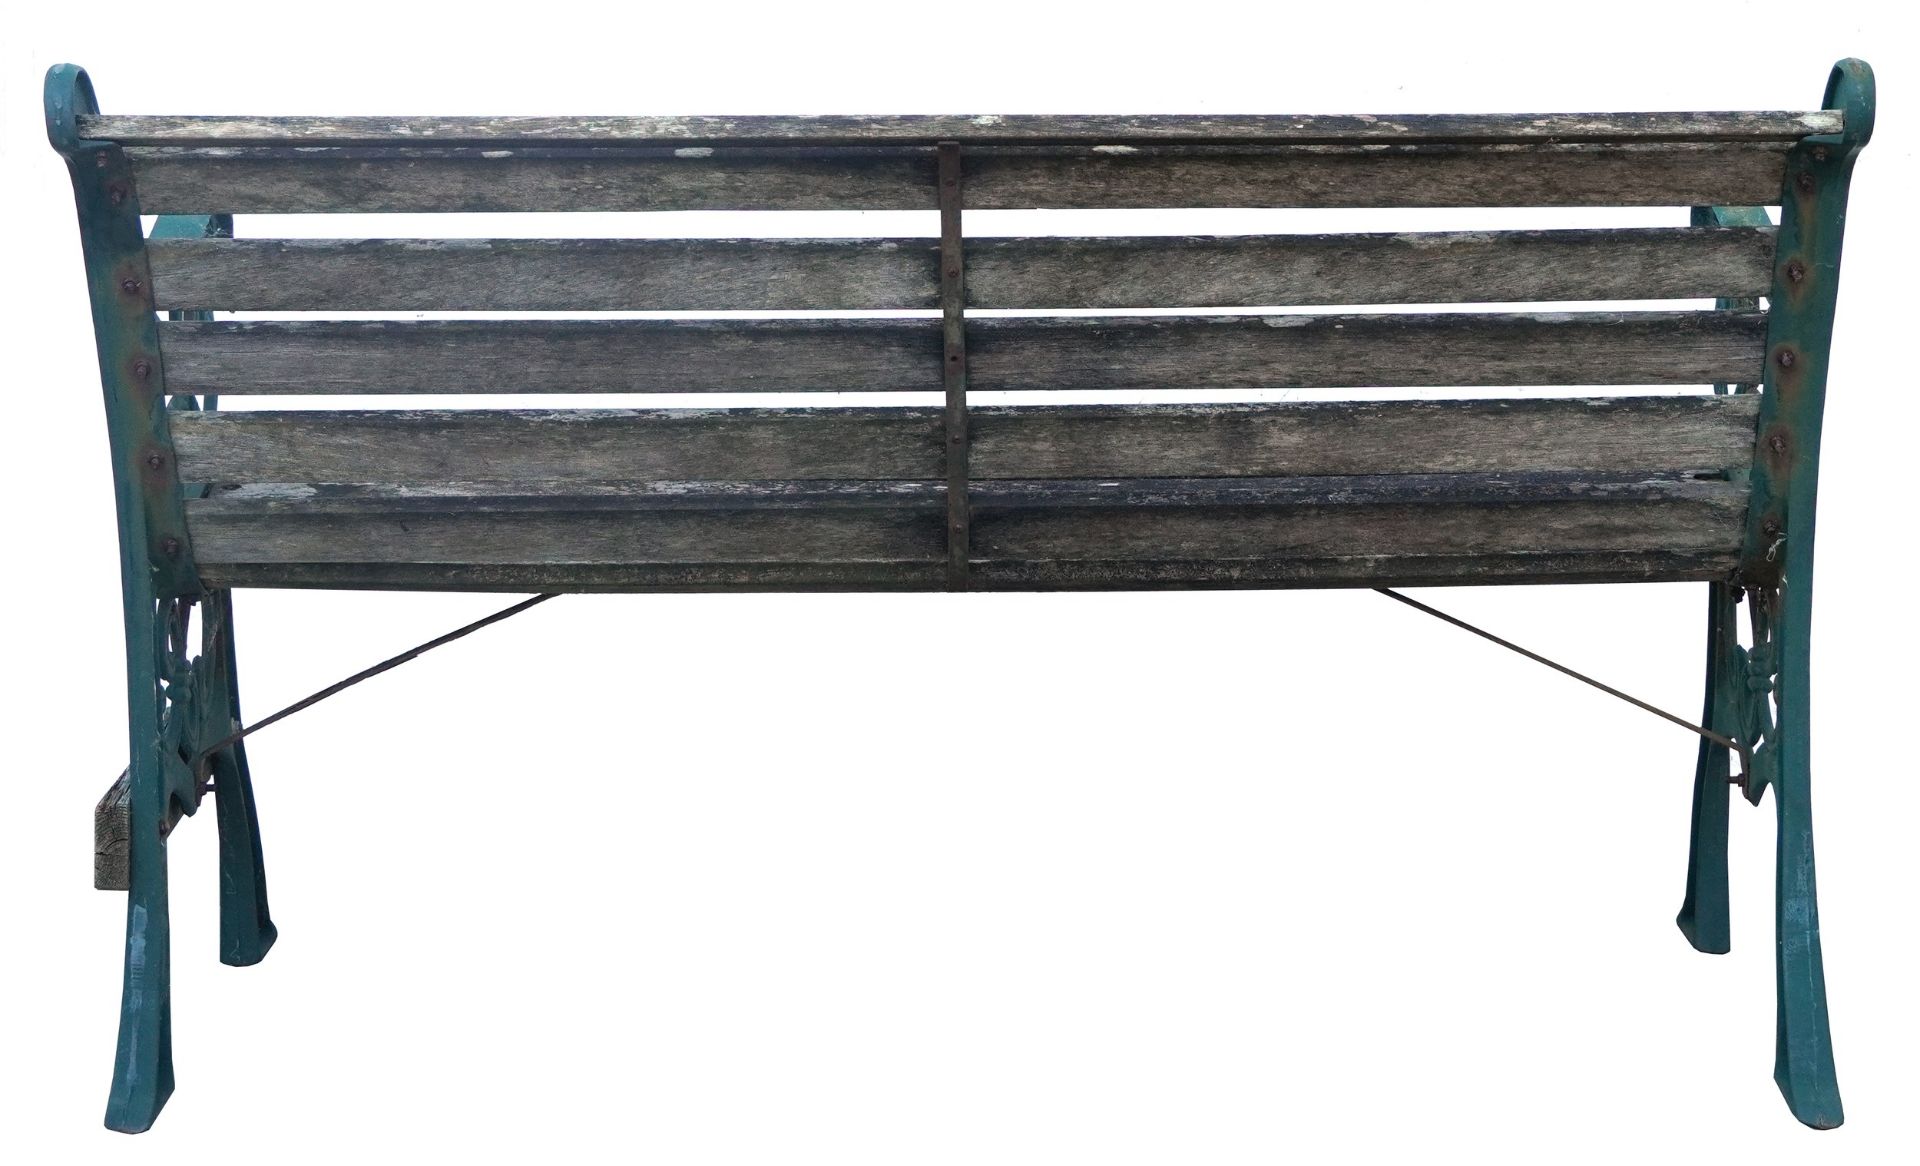 Green painted cast iron wooden slatted garden bench, 76cm high x 127cm wide - Image 2 of 2